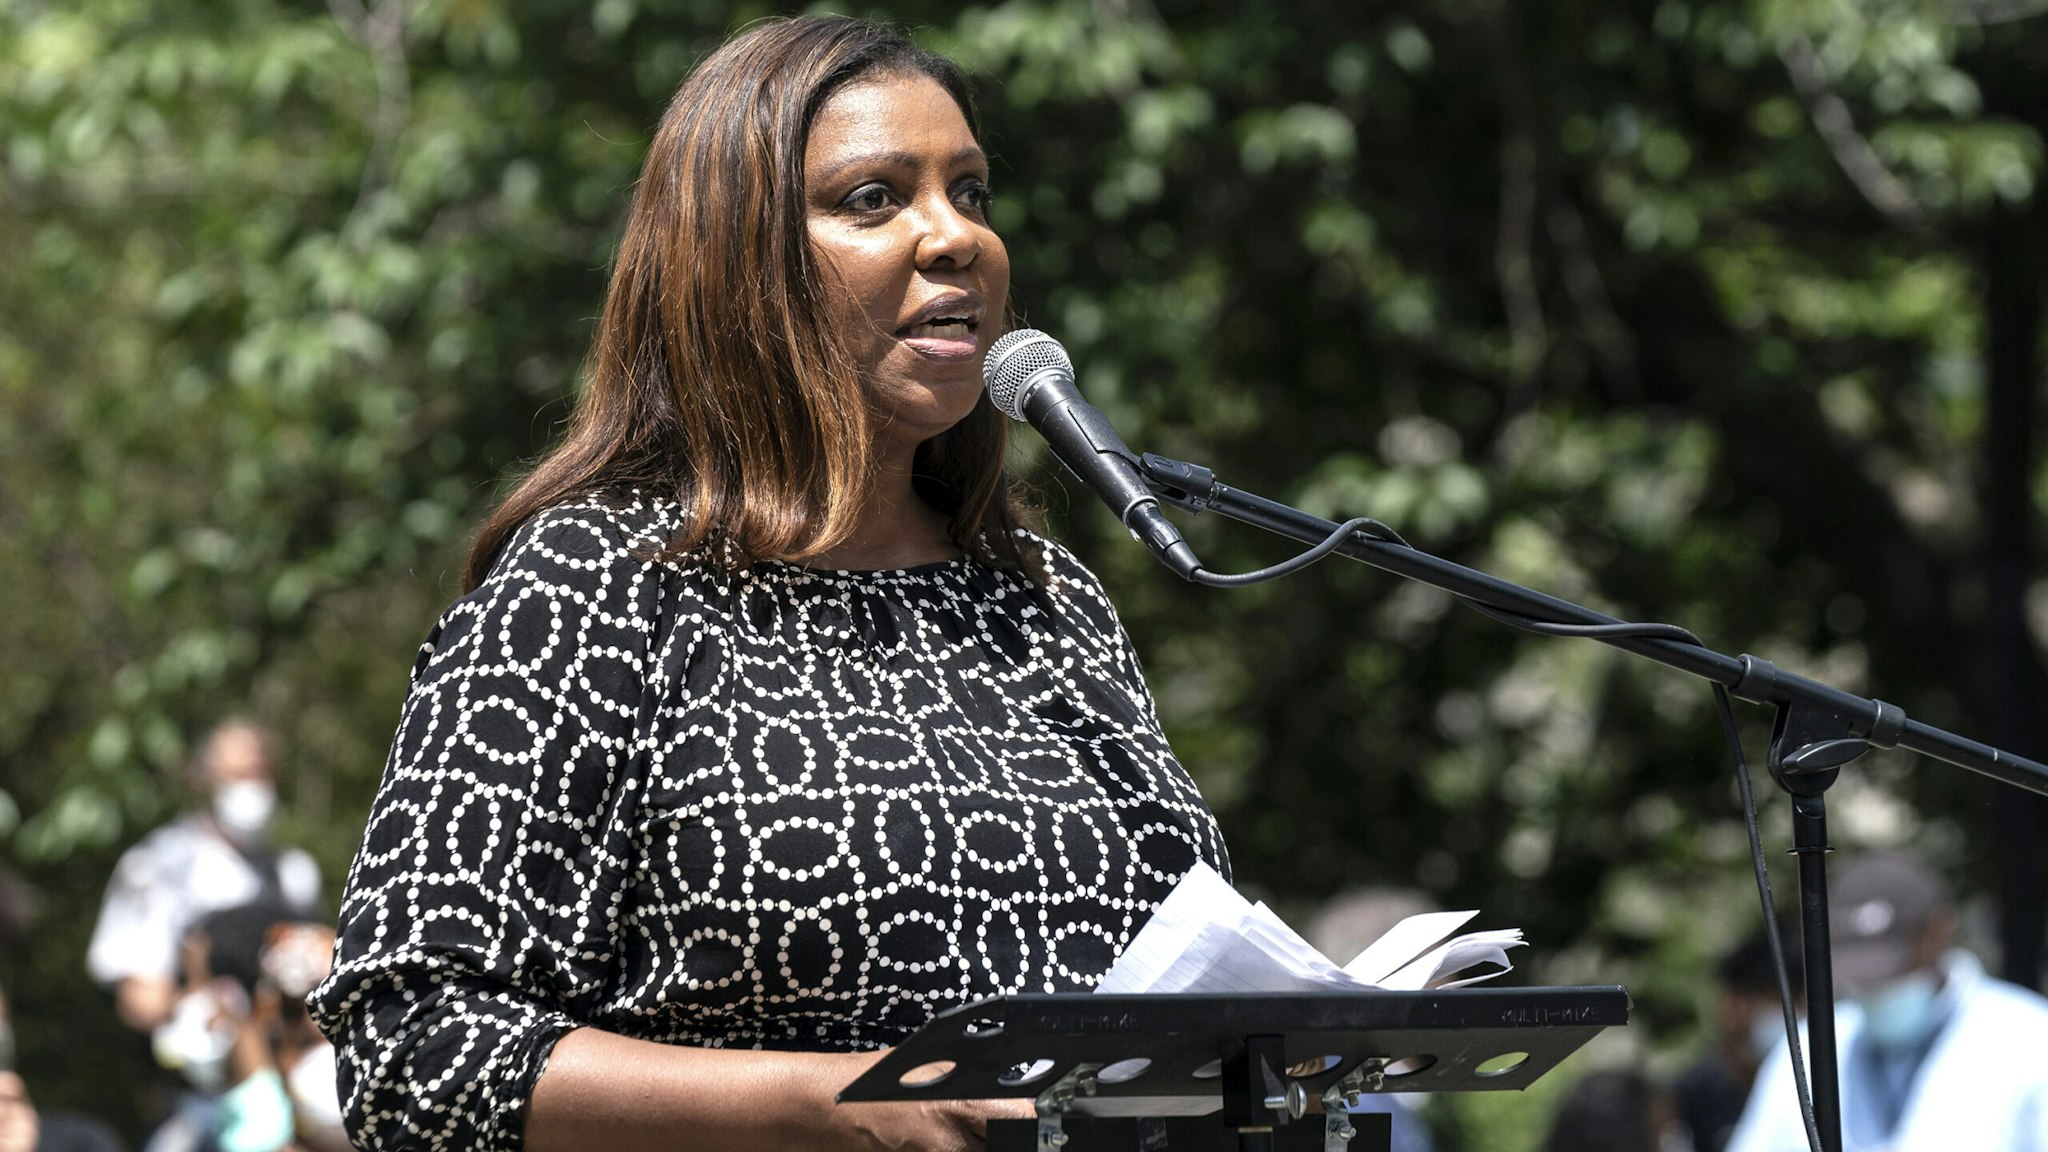 NEW YORK, UNITED STATES - 2020/06/04: New York State Attorney General Letitia James attends memorial service for George Floyd on Cadman Plaza.